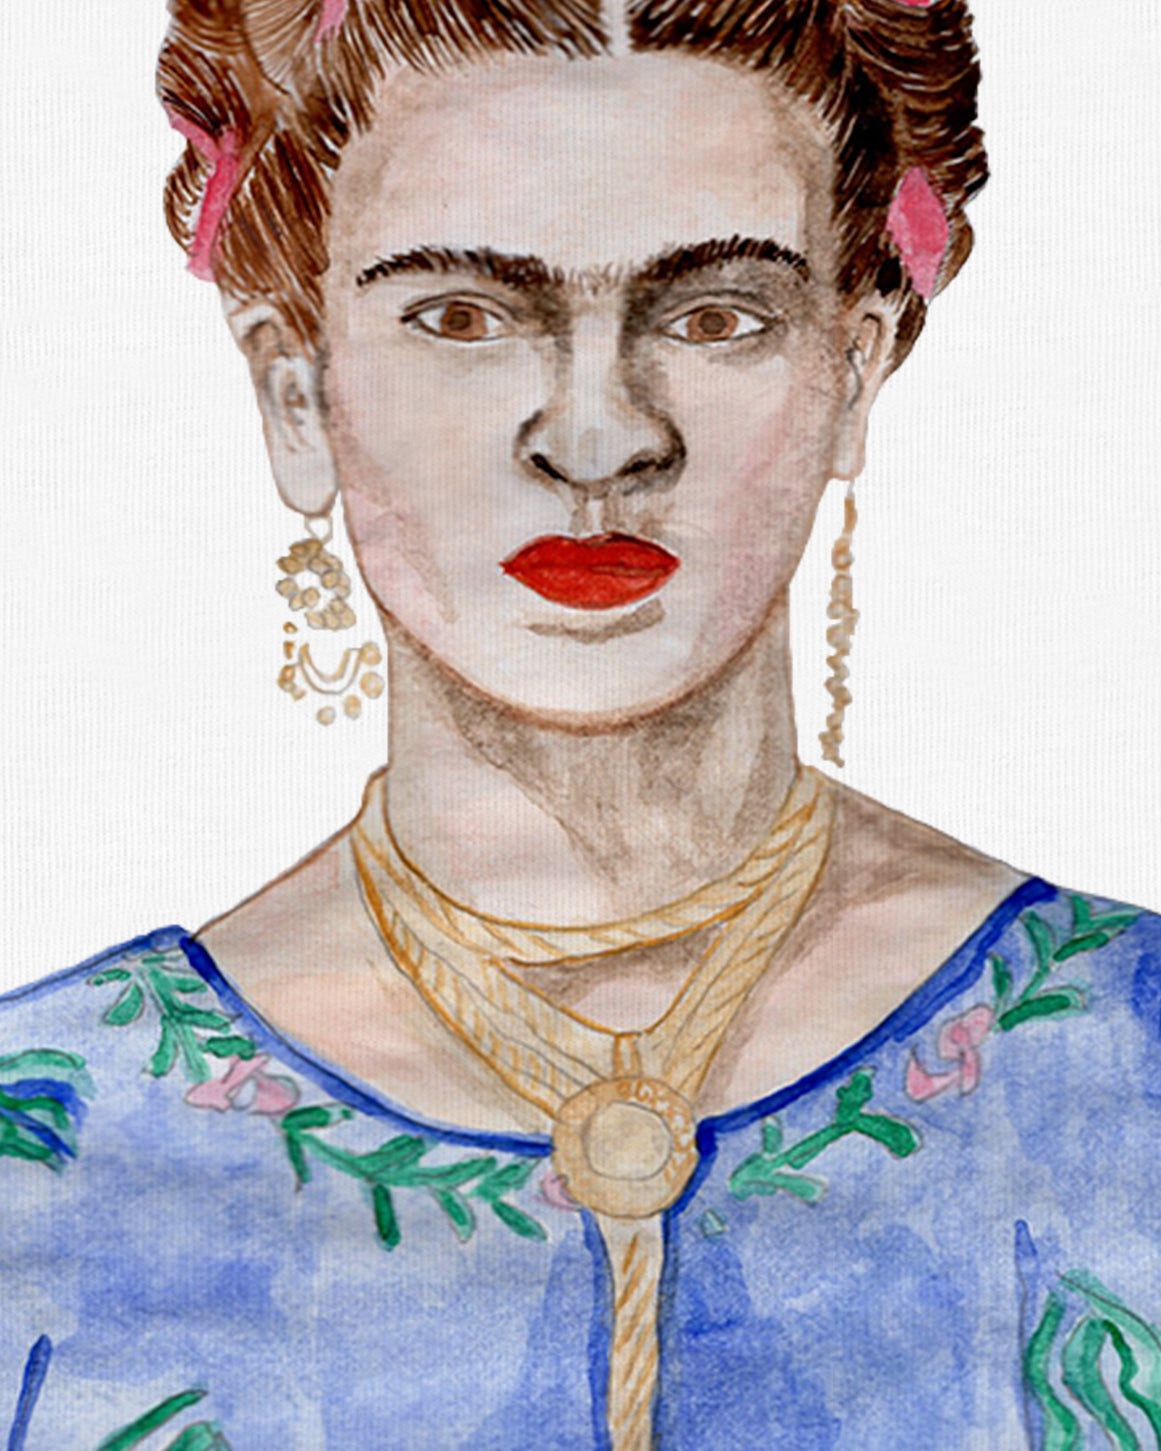 White Cropped Short Sleeve 100% Cotton Tee with original watercolor painting print of the artist Frida Kahlo